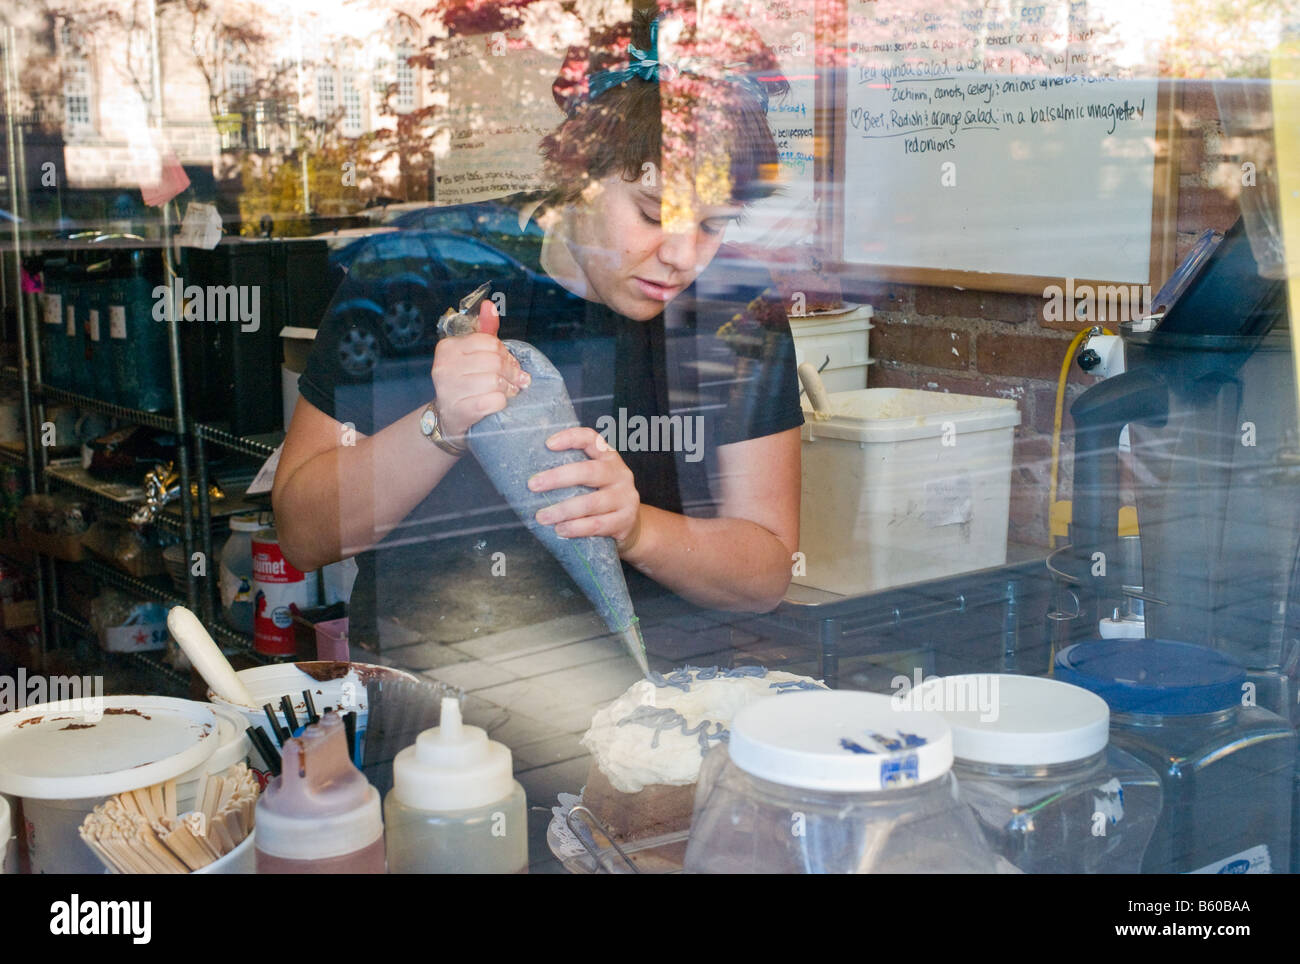 A Bakery Chef prepares a birthday cake as seen through the front window of Claire's Cornercopia in New Haven CT USA Stock Photo